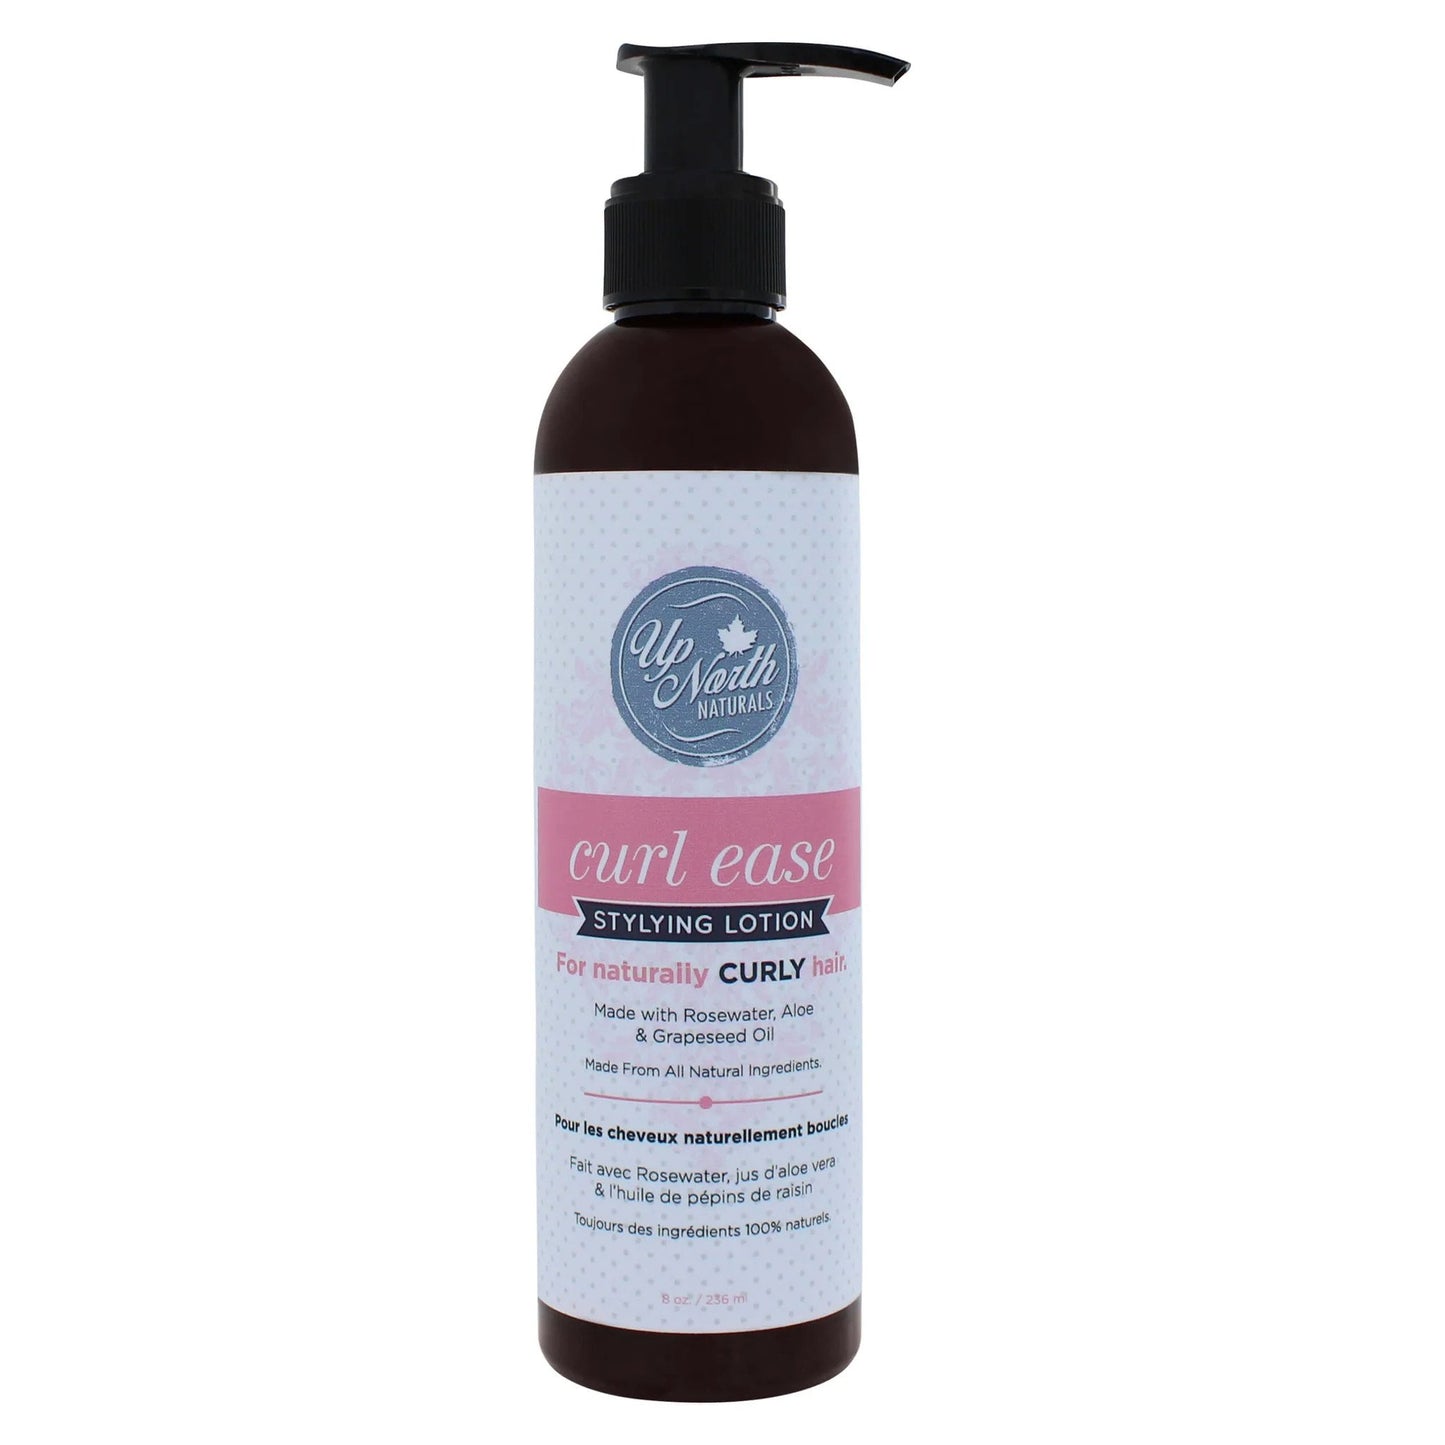 UpNorth Naturals Curl Ease Styling Lotion 8oz